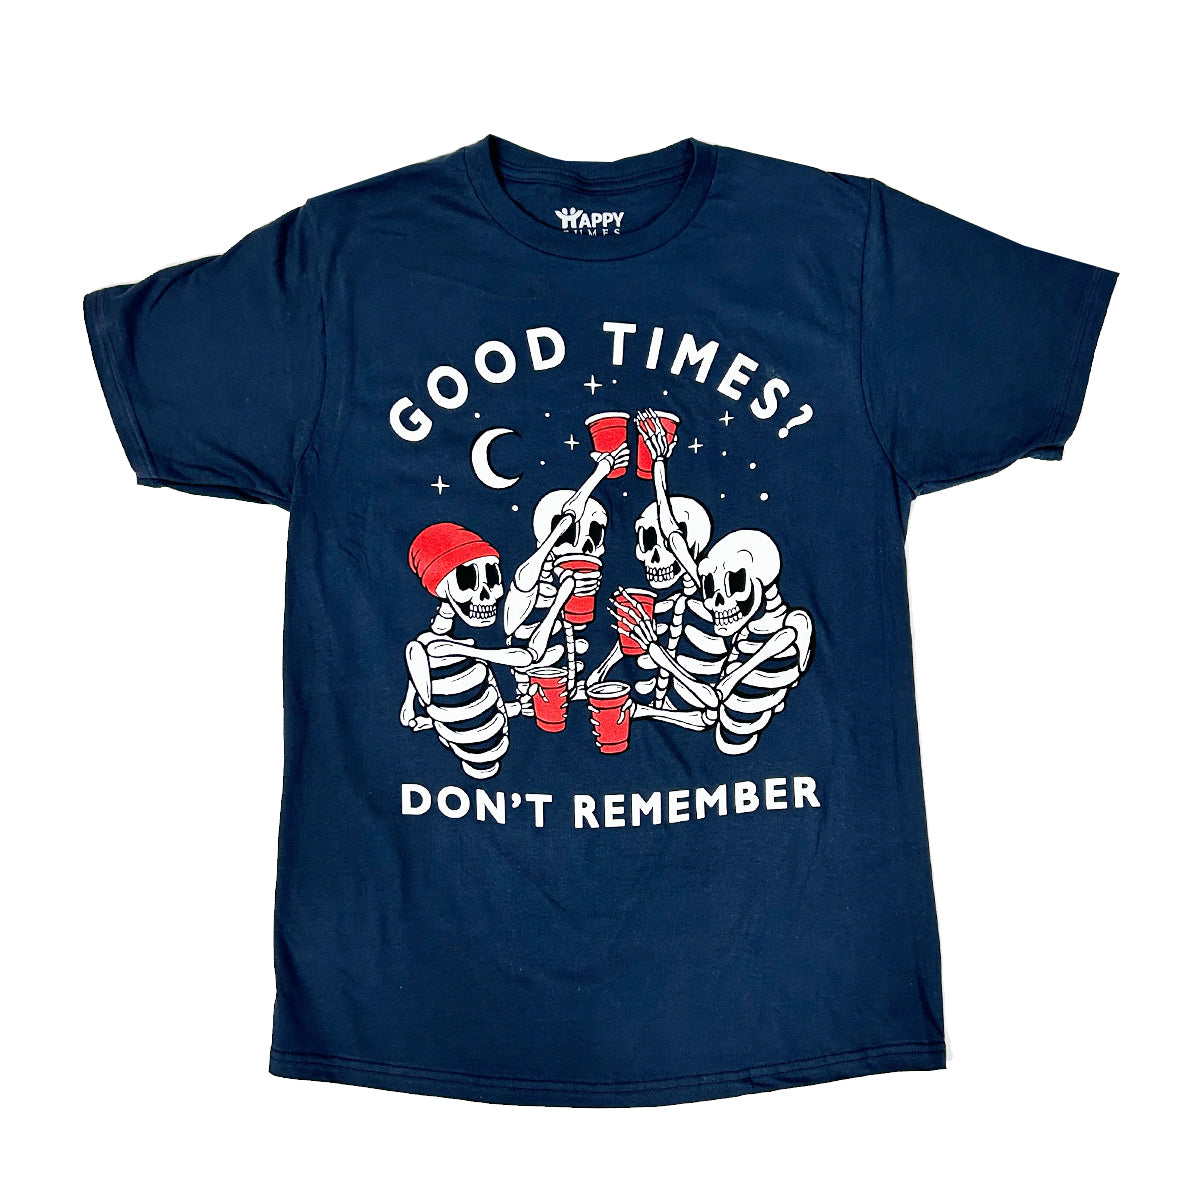 Good Times Don't Remember Short Sleeve T-SHIRT 100% Cotton - Pack of 6 Units 1S, 2M, 2L, 1XL